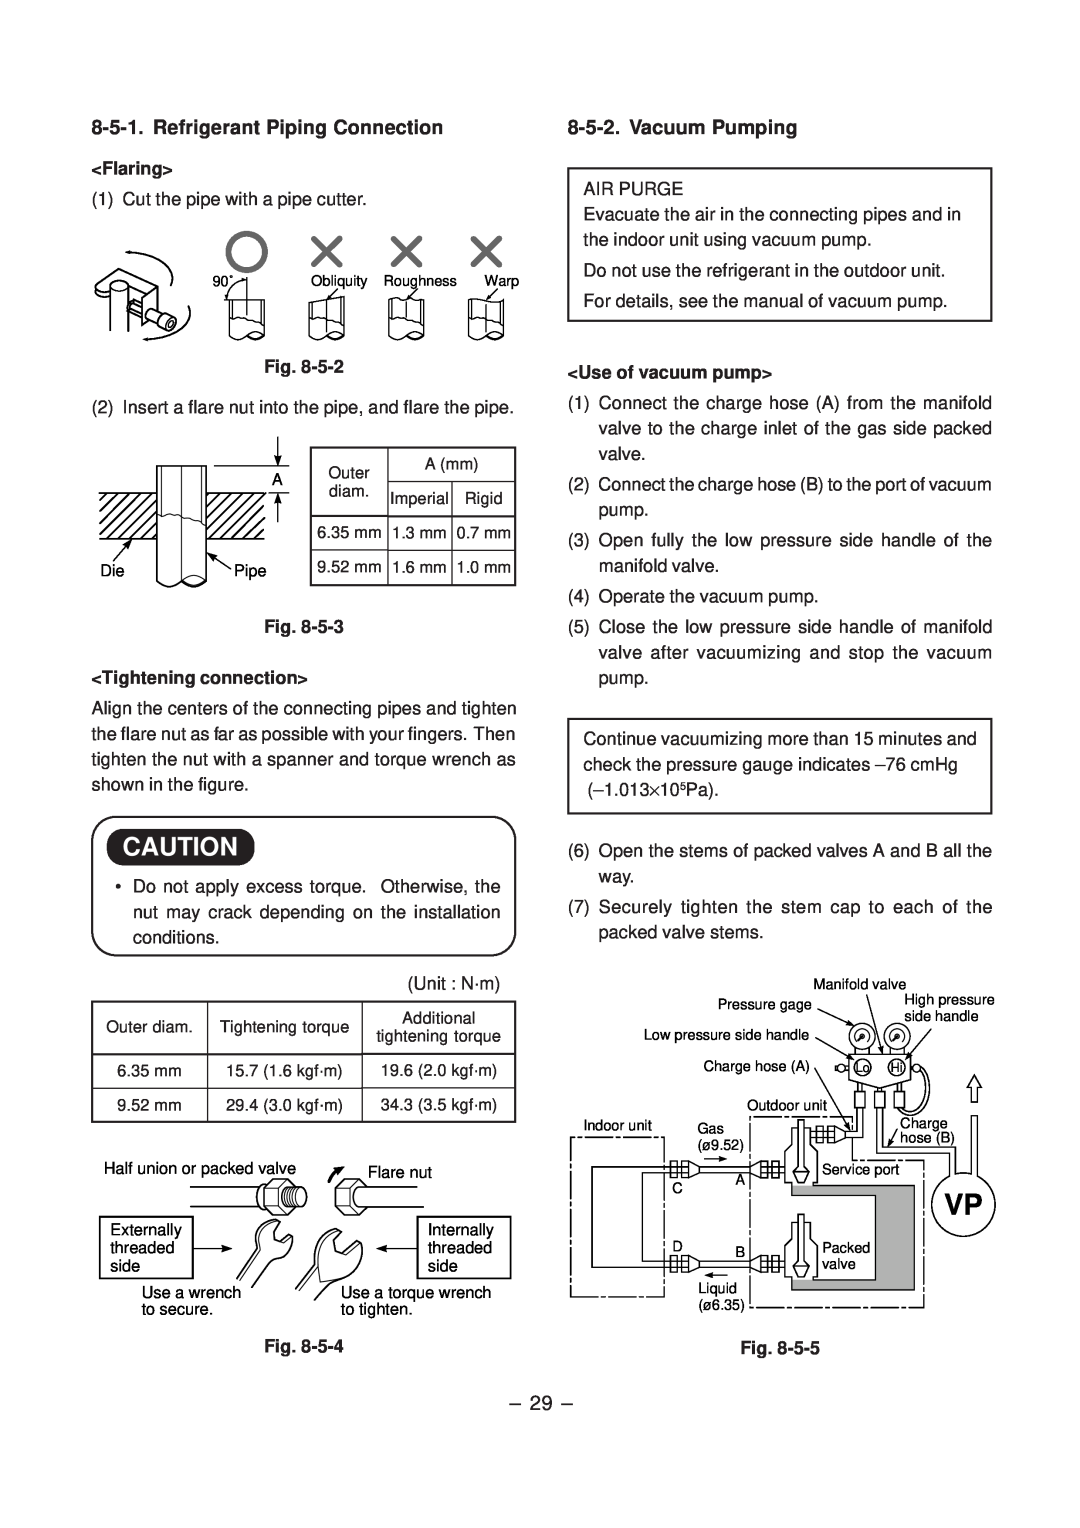 Toshiba RAS-10SAX Refrigerant Piping Connection, Vacuum Pumping, Flaring, Fig. Tightening connection, Use of vacuum pump 